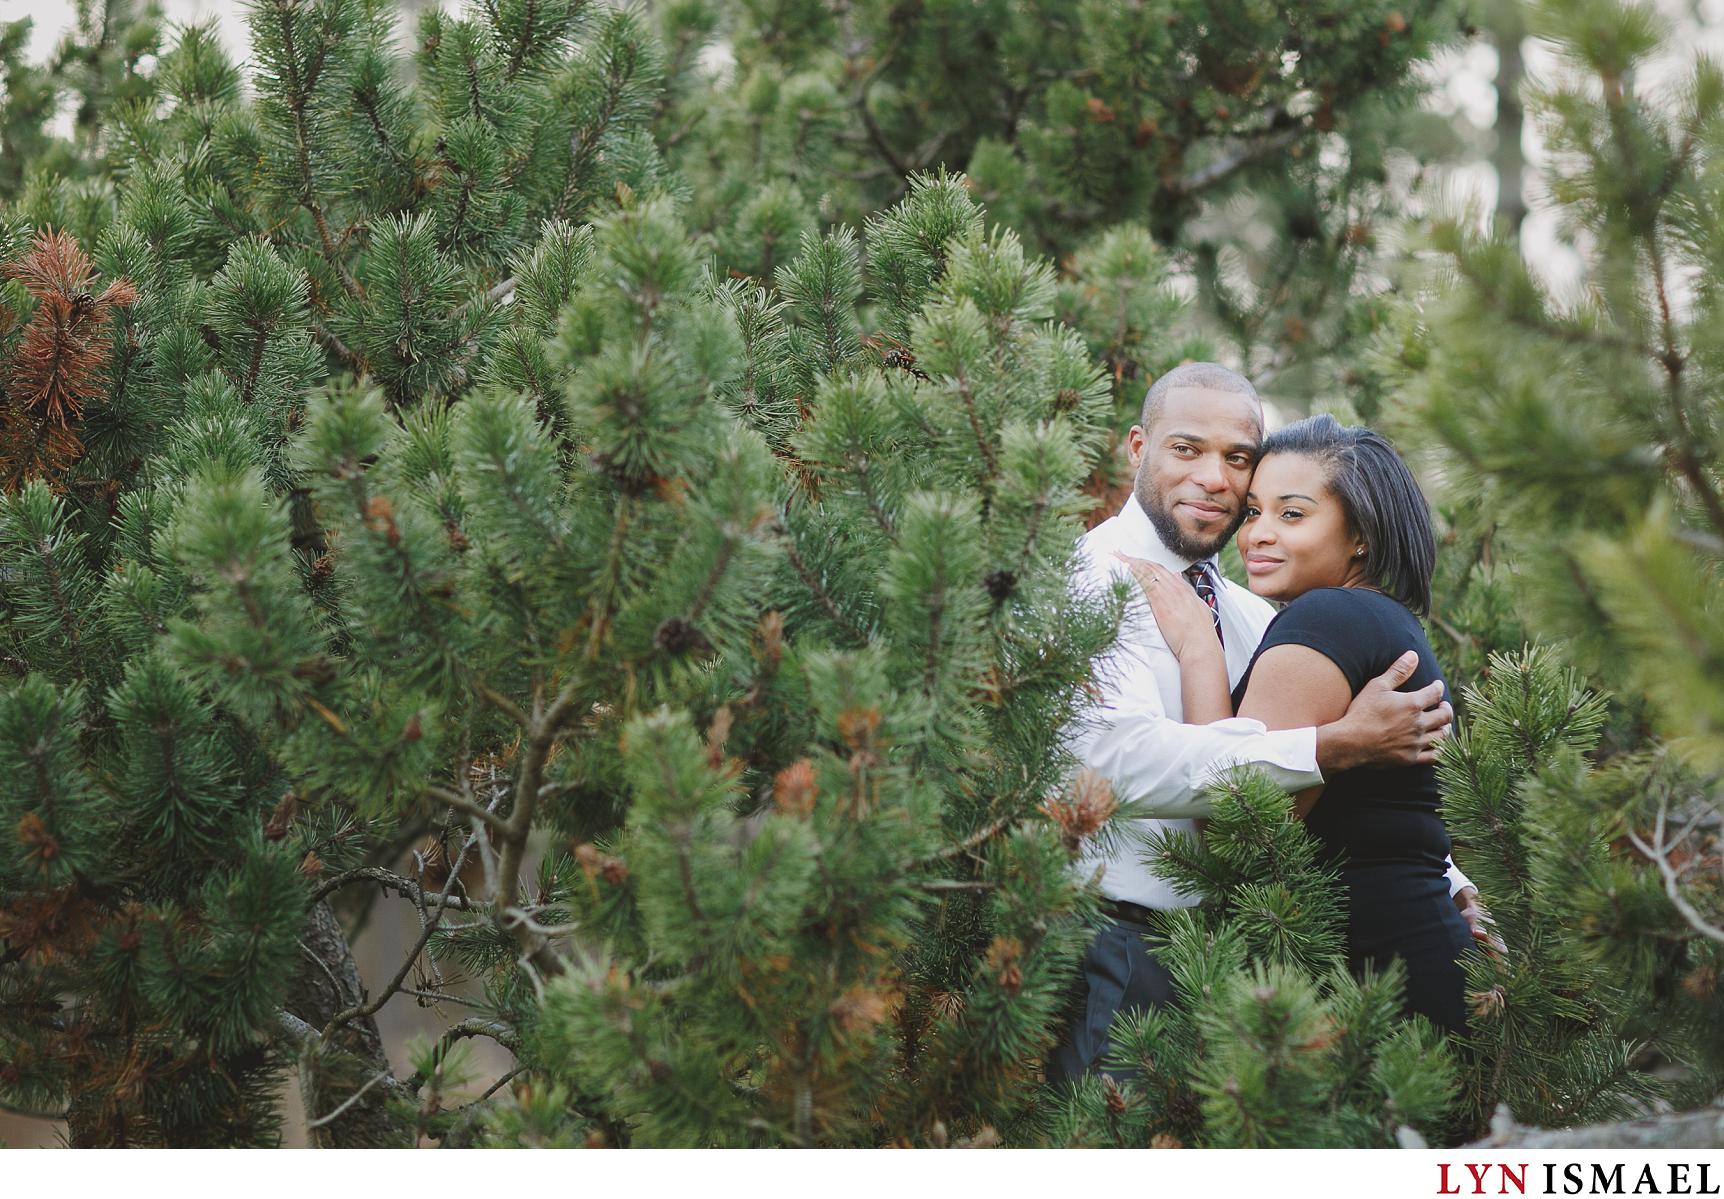 A couple in the middle of a pine tree